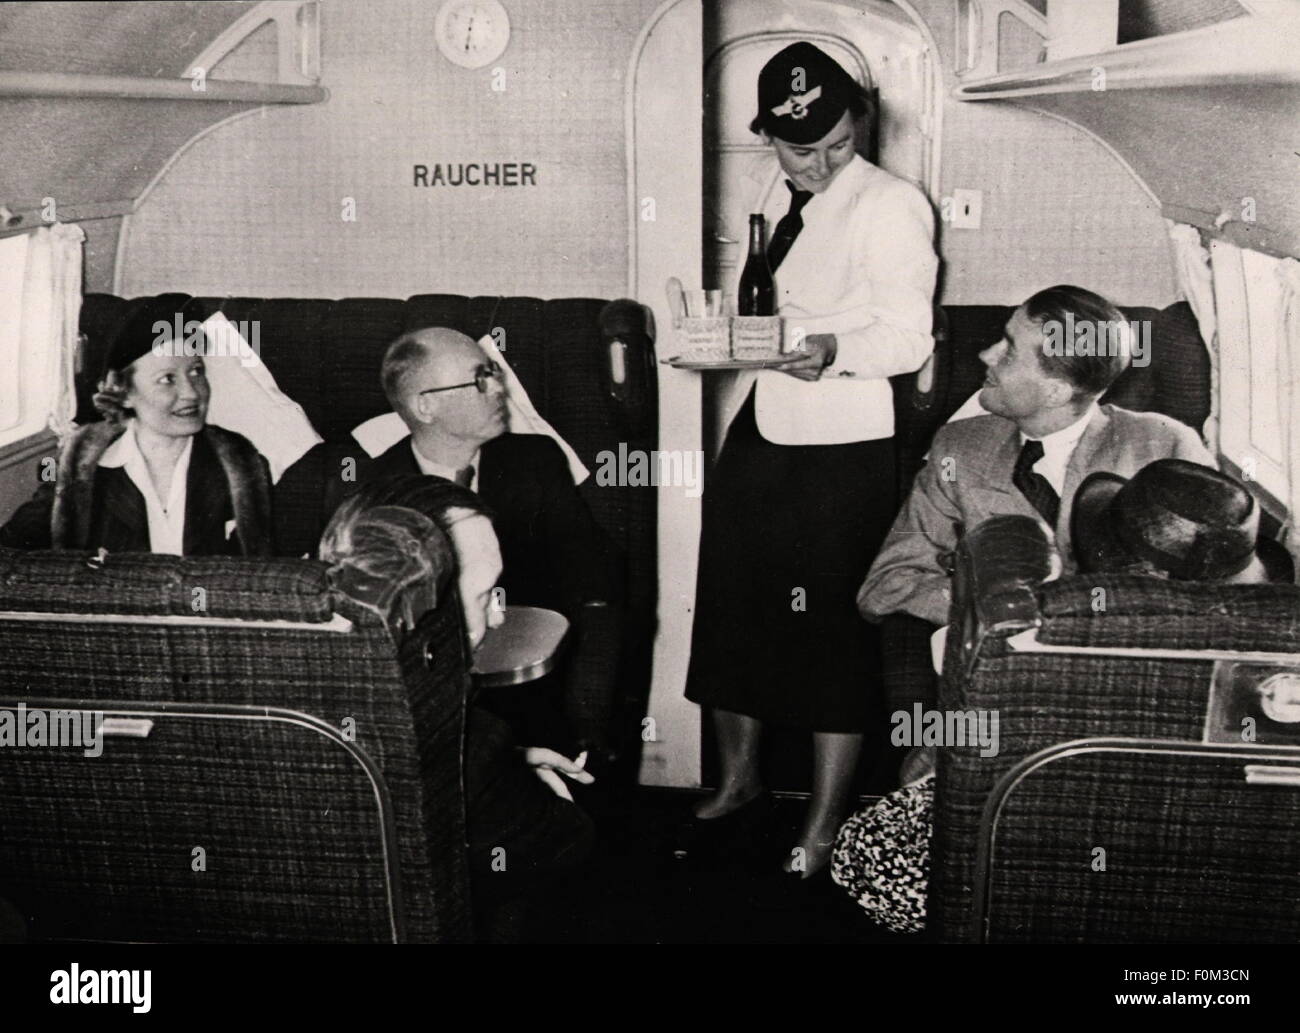 transport / transportation,aviation,passenger planes,interior,Focke-Wulf 200,German Lufthansa,circa 1930,1930s,30s,20th century,historic,historical,smoking compartment,smoker,smoking compartments,smokers,stewardess,air hostess,stewardesses,air hostesses,flight attendant,tray,trays,service,servicing,serving,comfort,board,foods,meals,catering,feeding,service,provision of food and drink,cabin,cabins,air passenger,air passengers,bumpee,flight,flights,travel by air,travels by air,travel by air,traveler,traveller,traveler,Additional-Rights-Clearences-Not Available Stock Photo